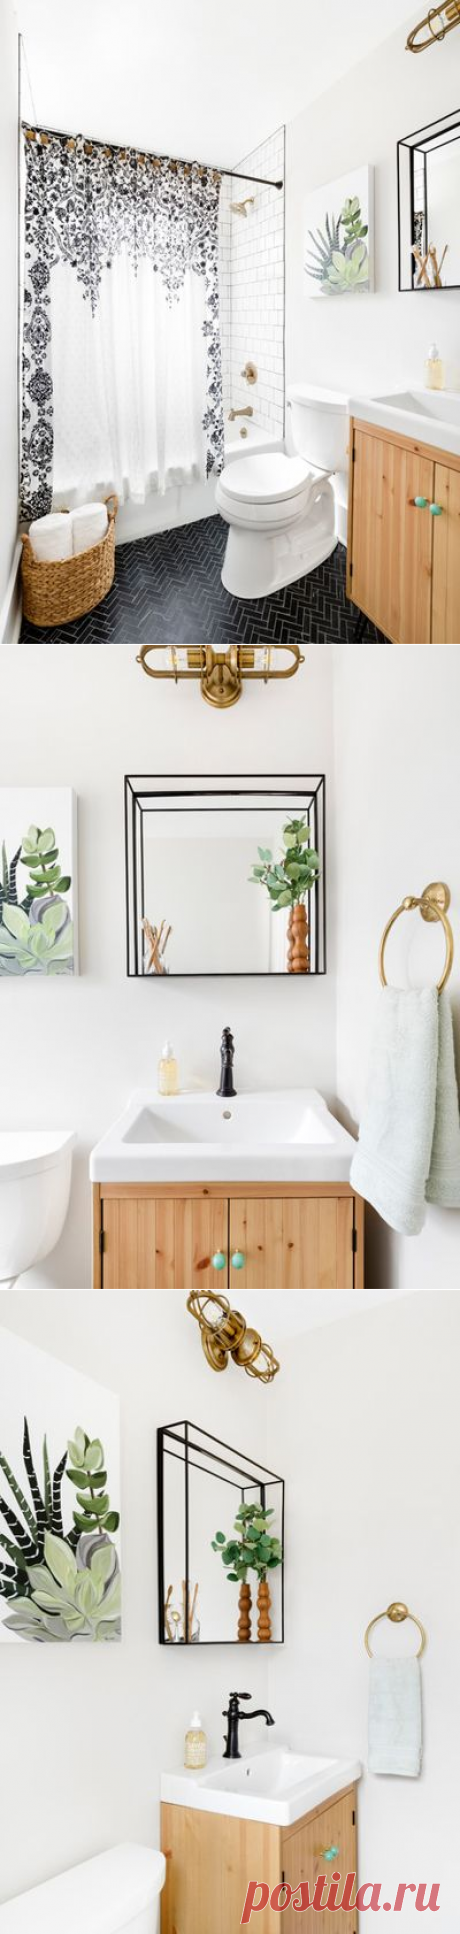 A Designer Tests Ideas in Her Own 38-Square-Foot Bathroom